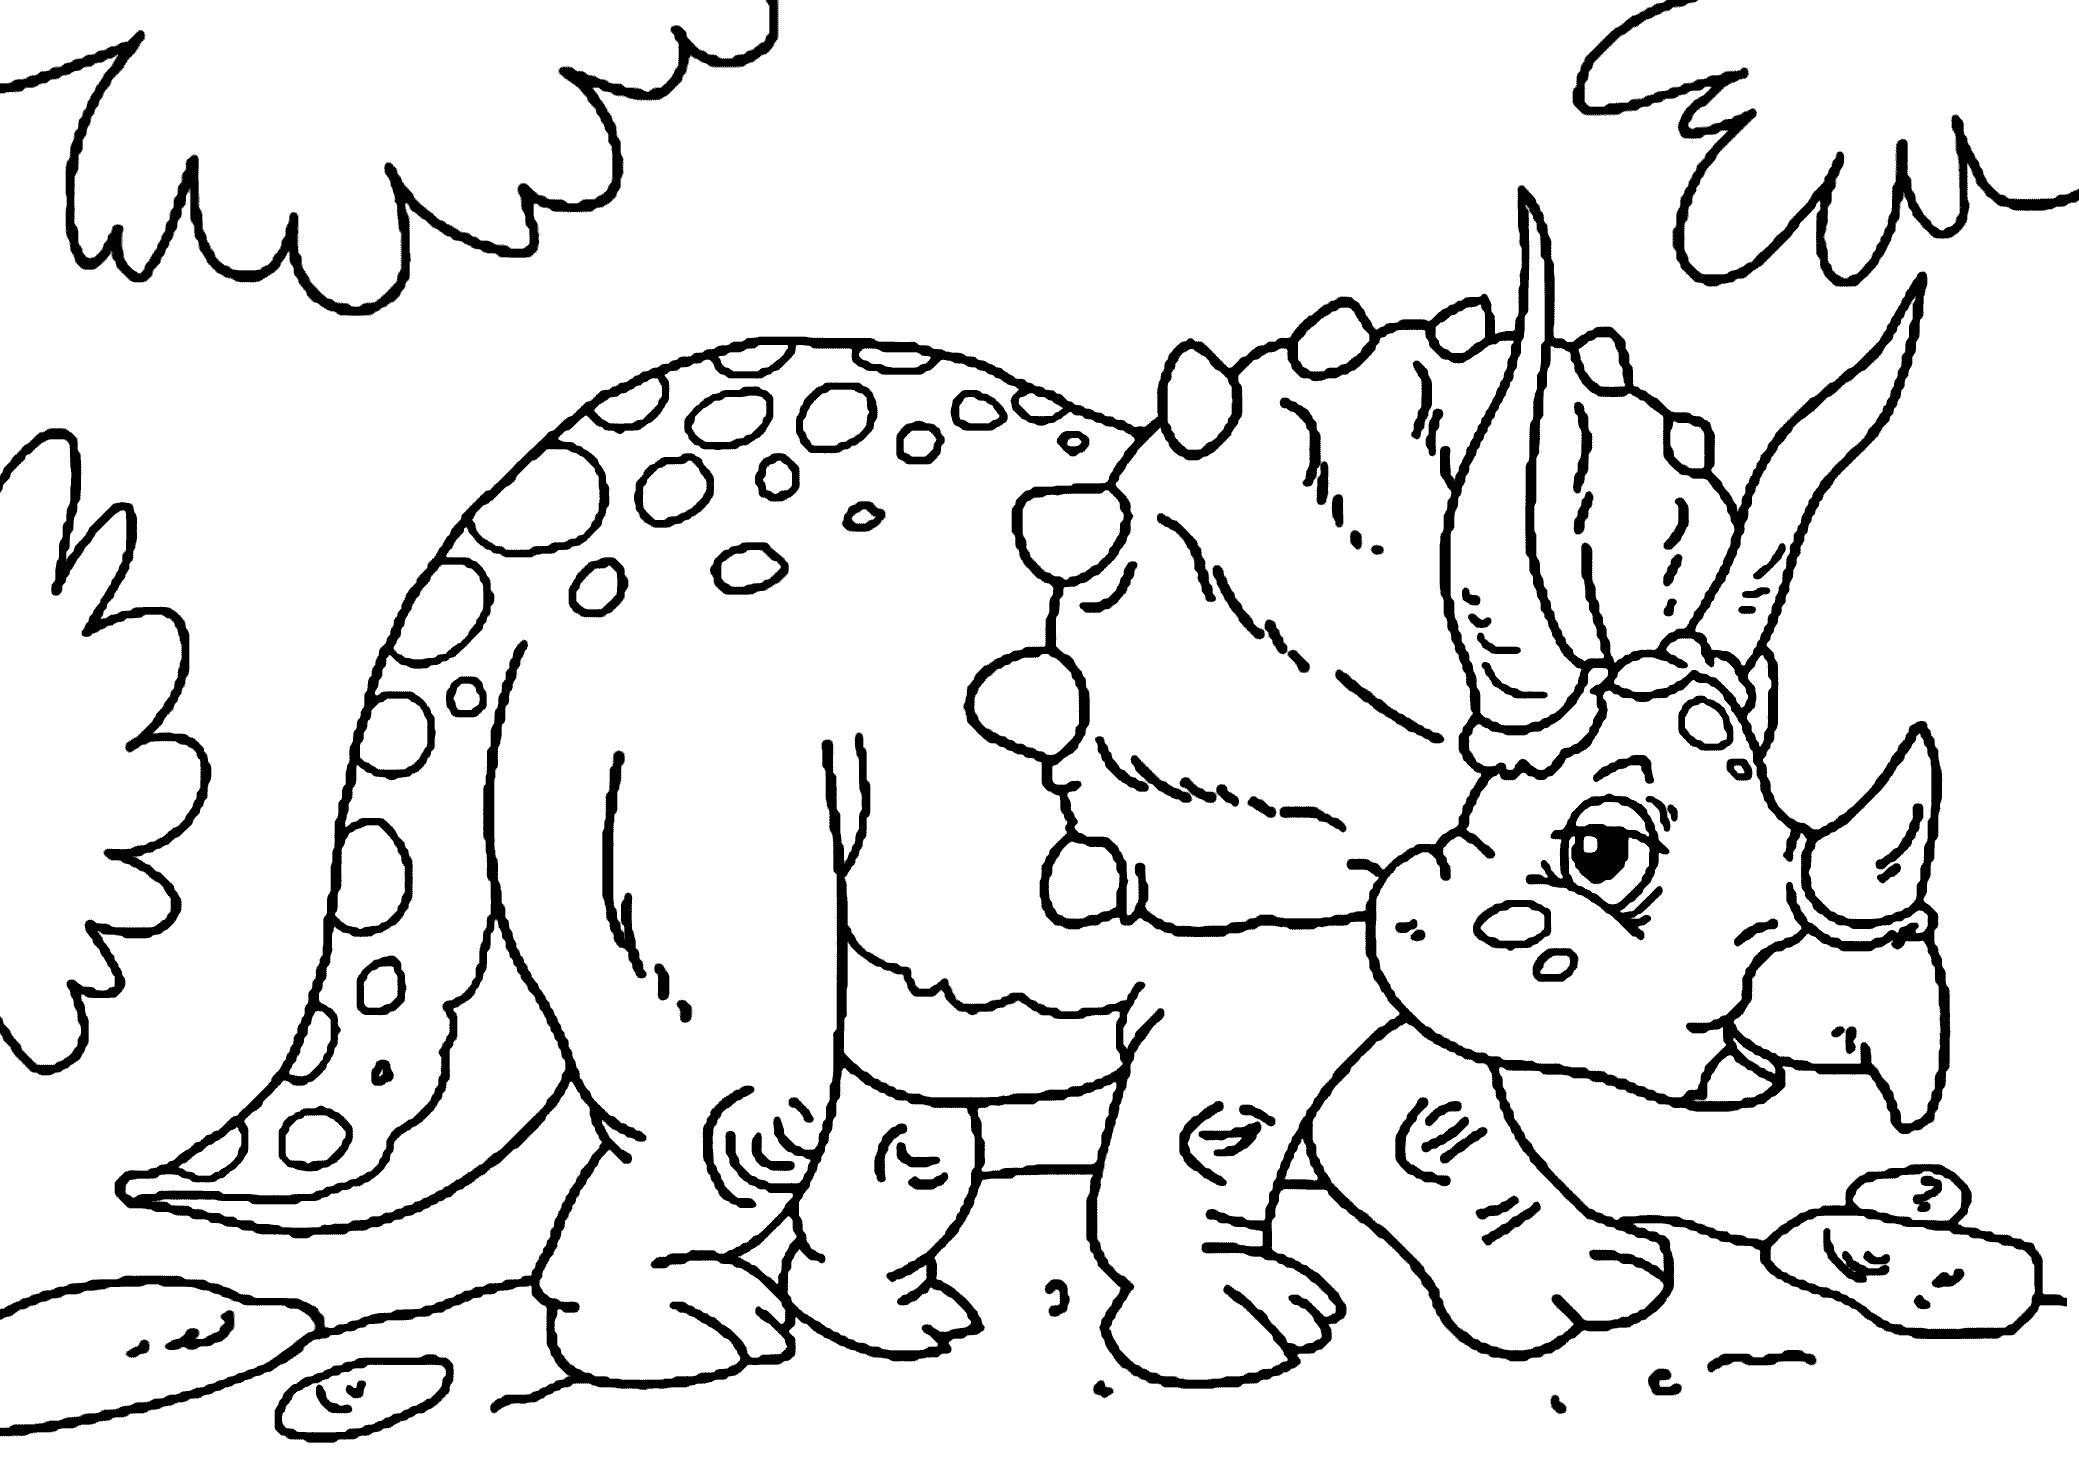 Cute Dinosaur Coloring Pages For Kids at GetColorings.com ...